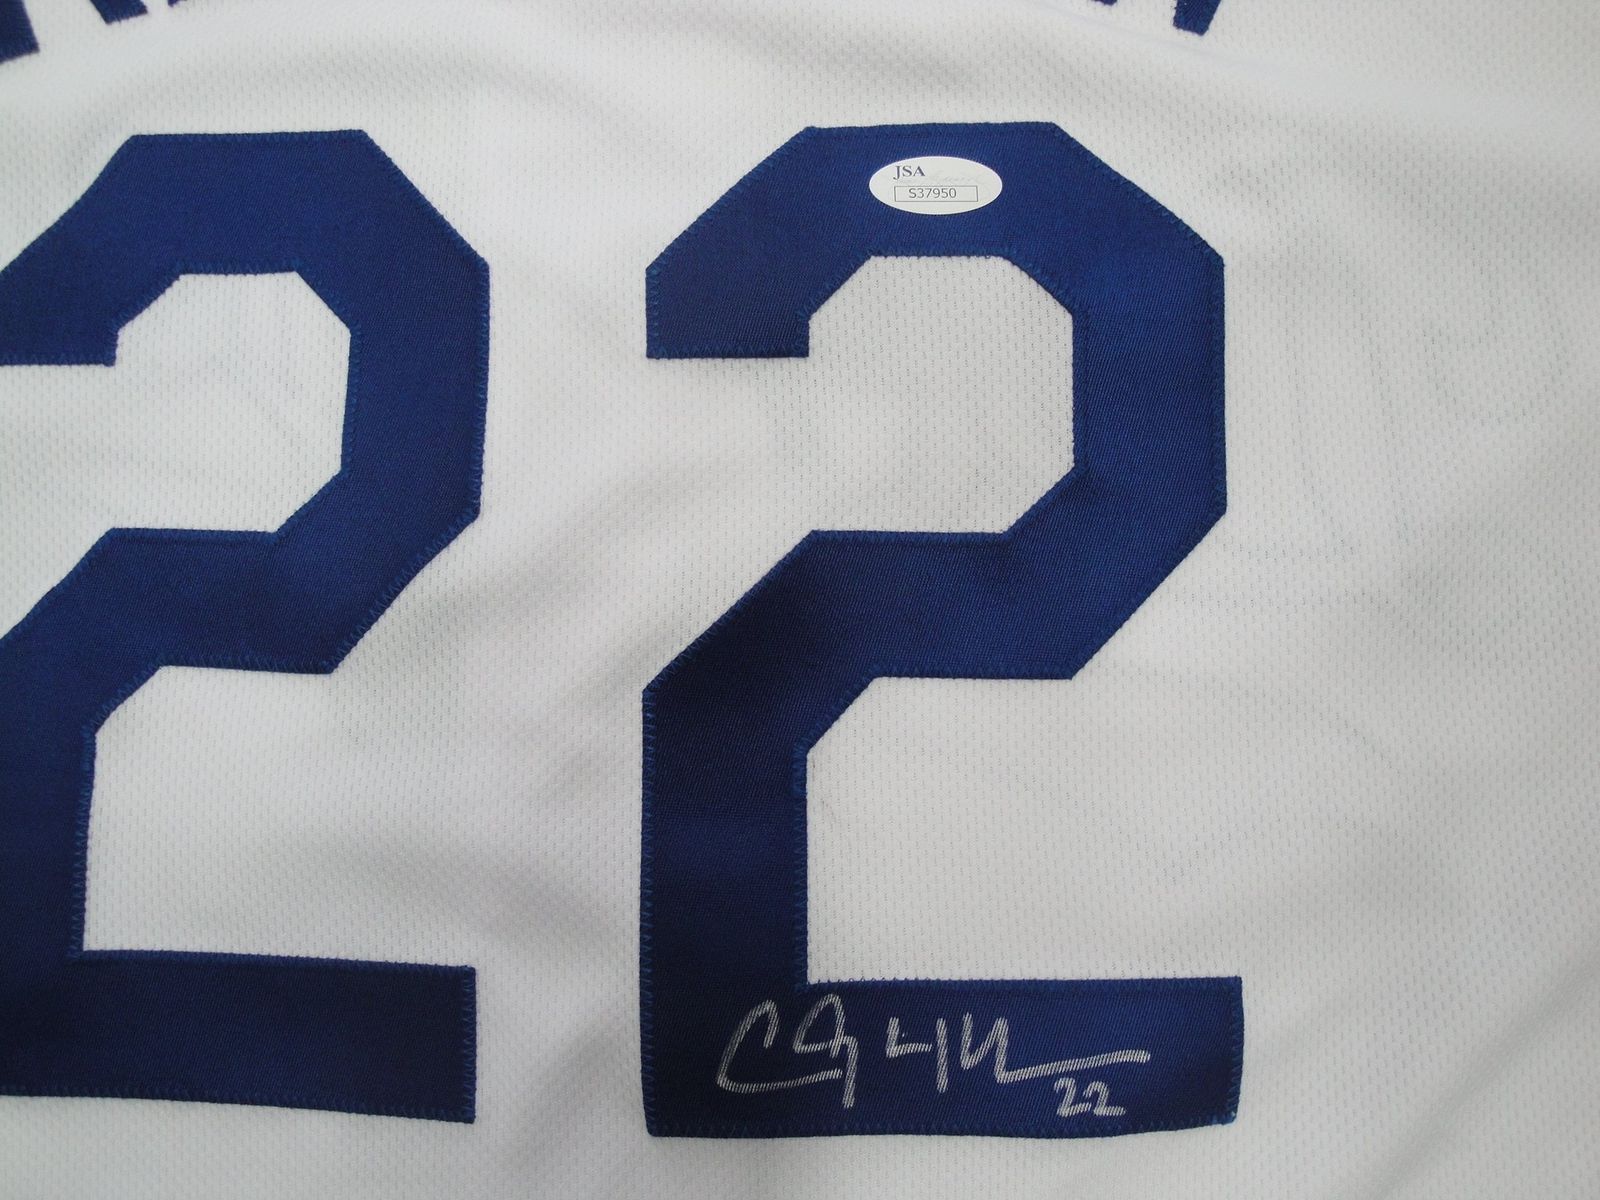 Clayton Kershaw autographed Jersey (Los Angeles Dodgers)